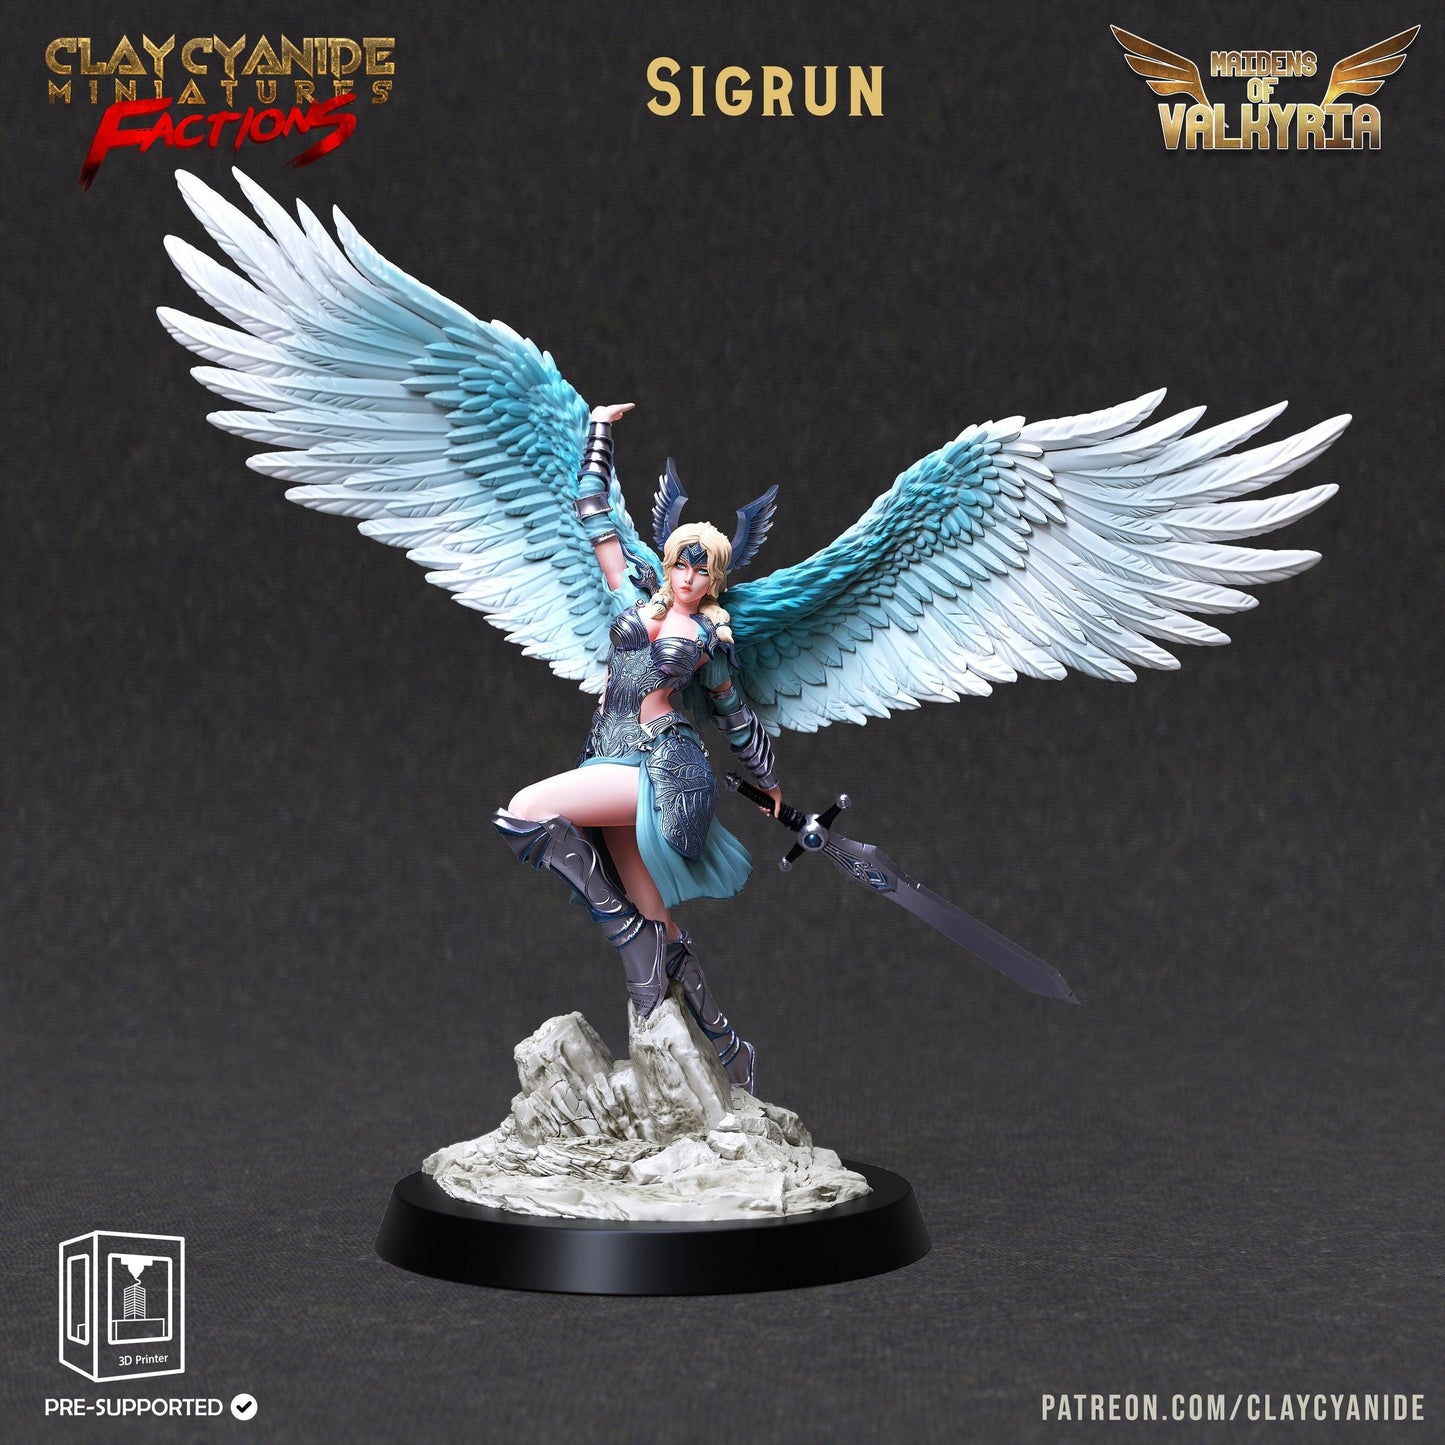 Valkyrie Viking Miniature | Sigrun Clay Cyanide | Maidens of Valkyria | Tabletop Gaming | DnD Miniature | Dungeons and Dragons - Plague Miniatures shop for DnD Miniatures